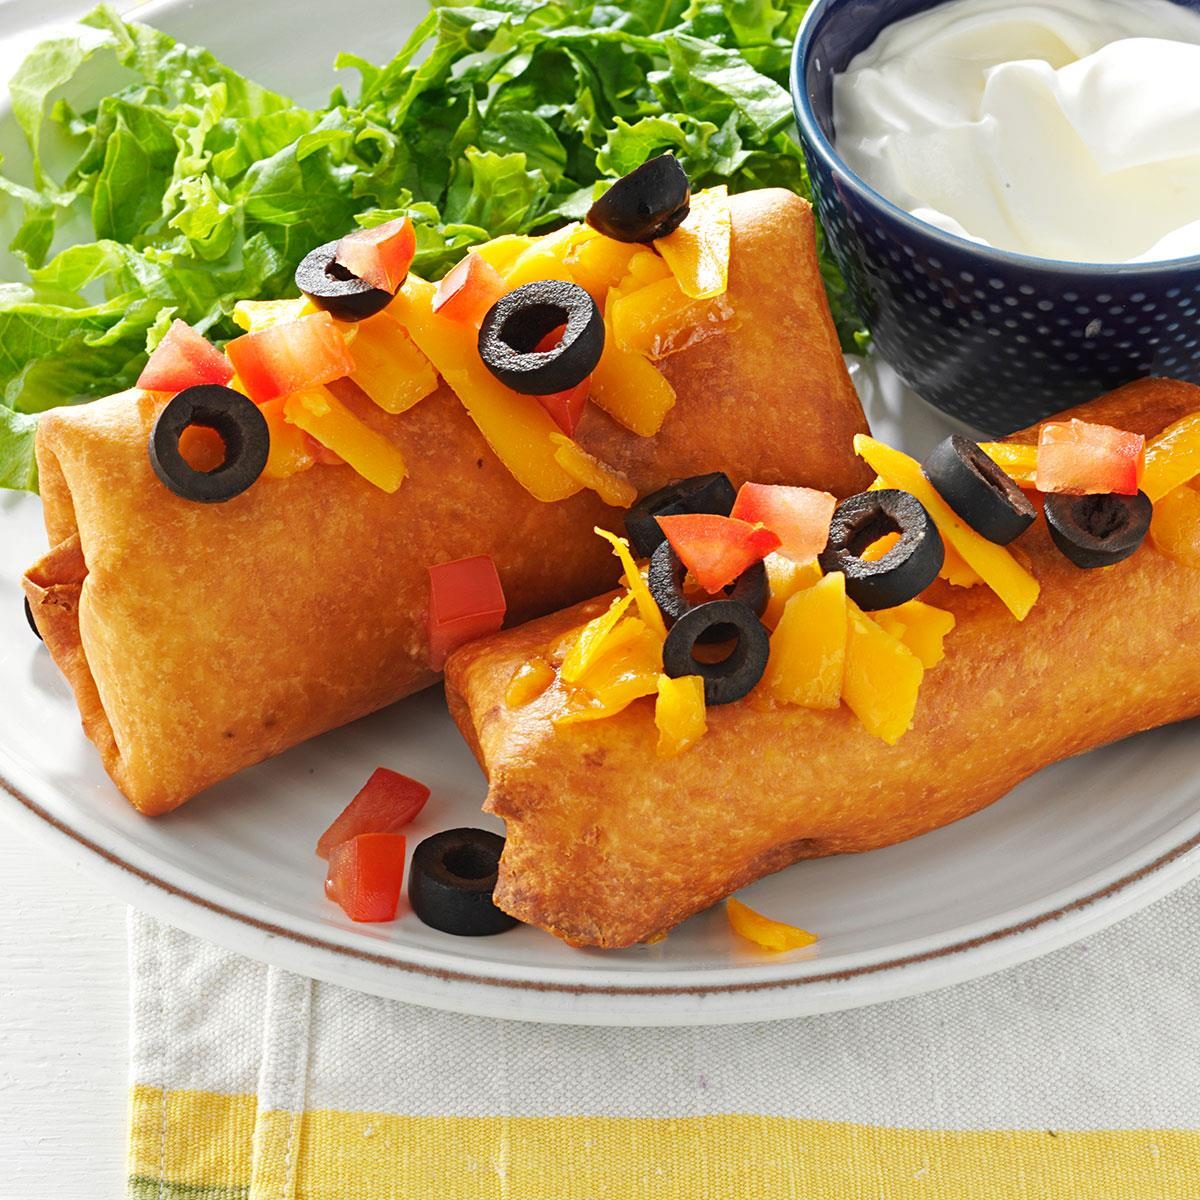 Ground Beef Chimichangas Recipe - Mexican.